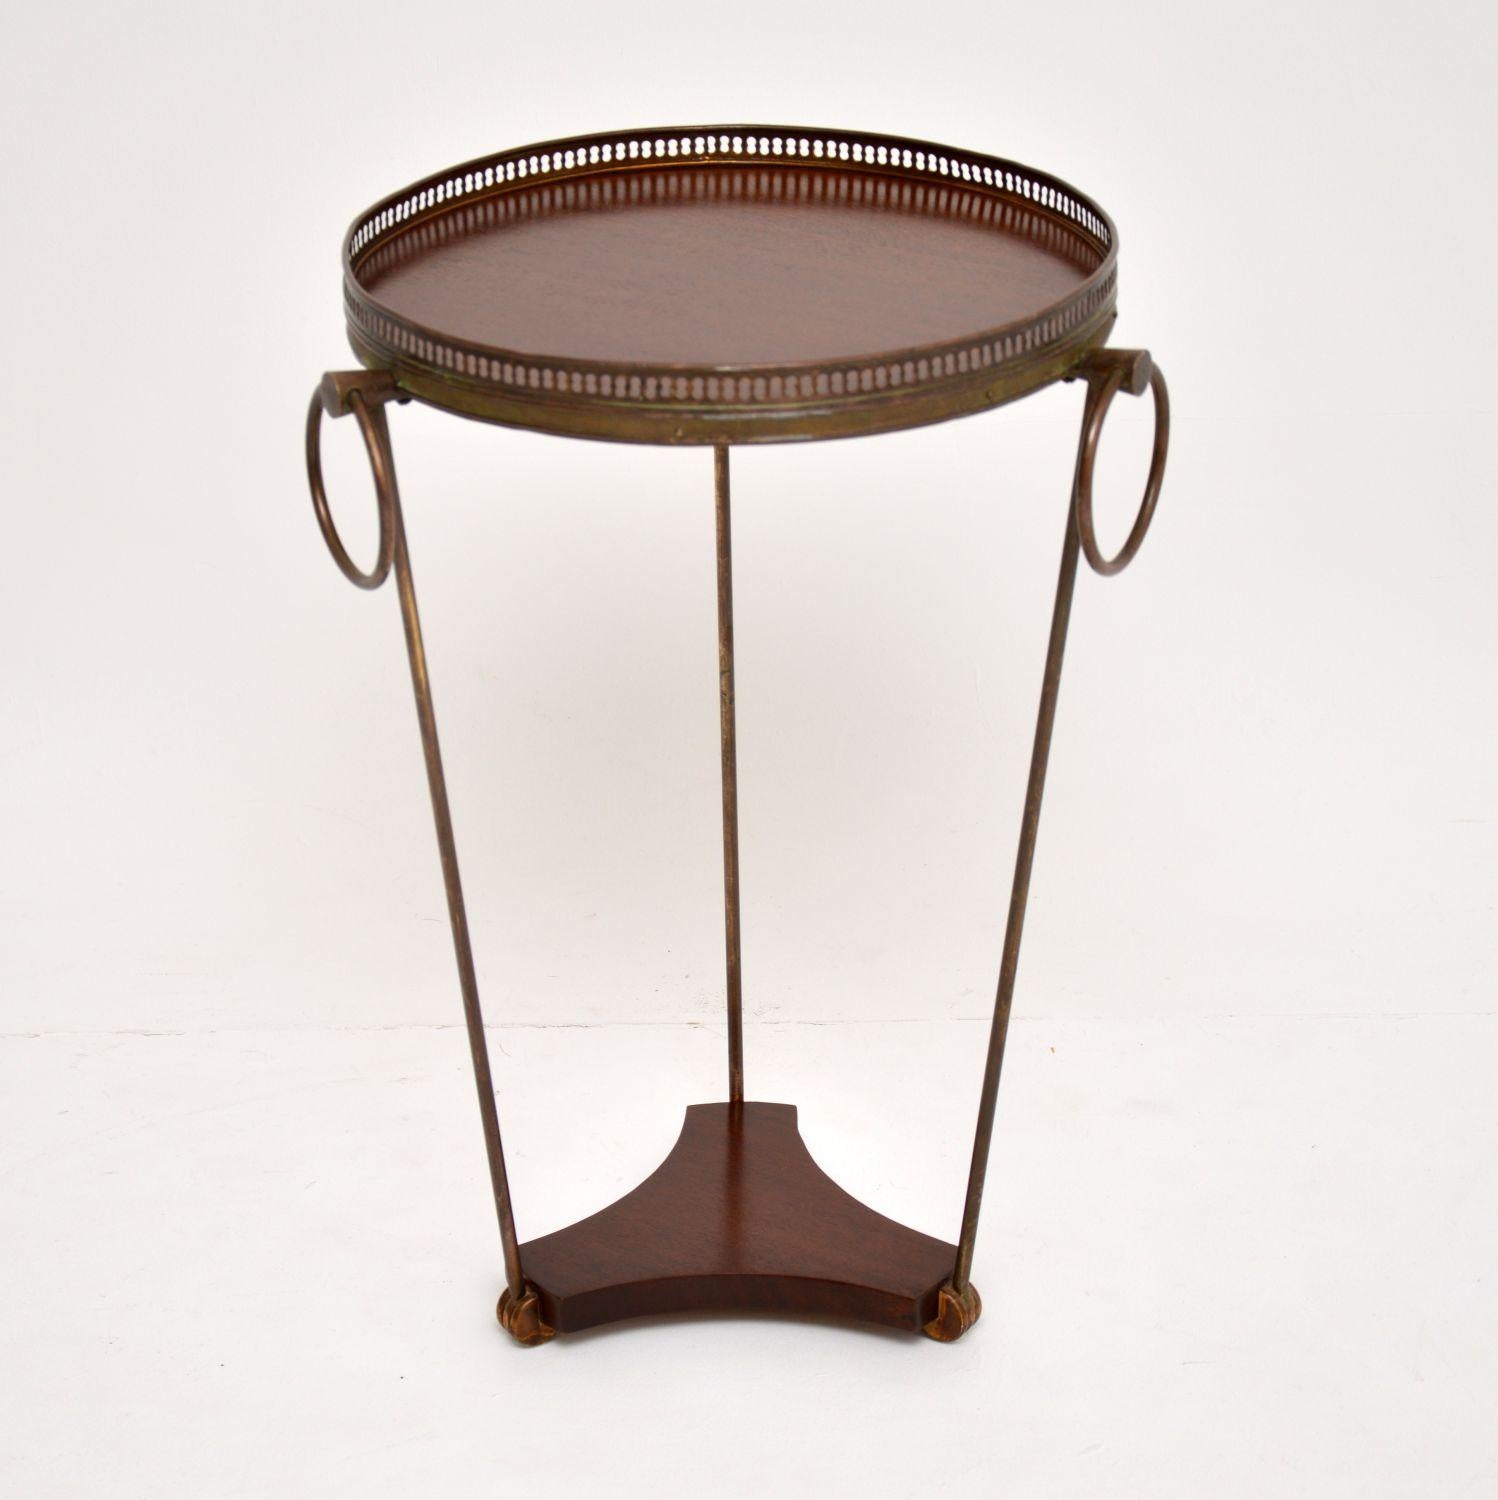 A beautifully designed vintage side tale in brass and mahogany. This was made in France and dates from the 1950s-1960s.

It is of lovely quality, with a brass gallery around the circular top, with three large brass rings attached. The three brass